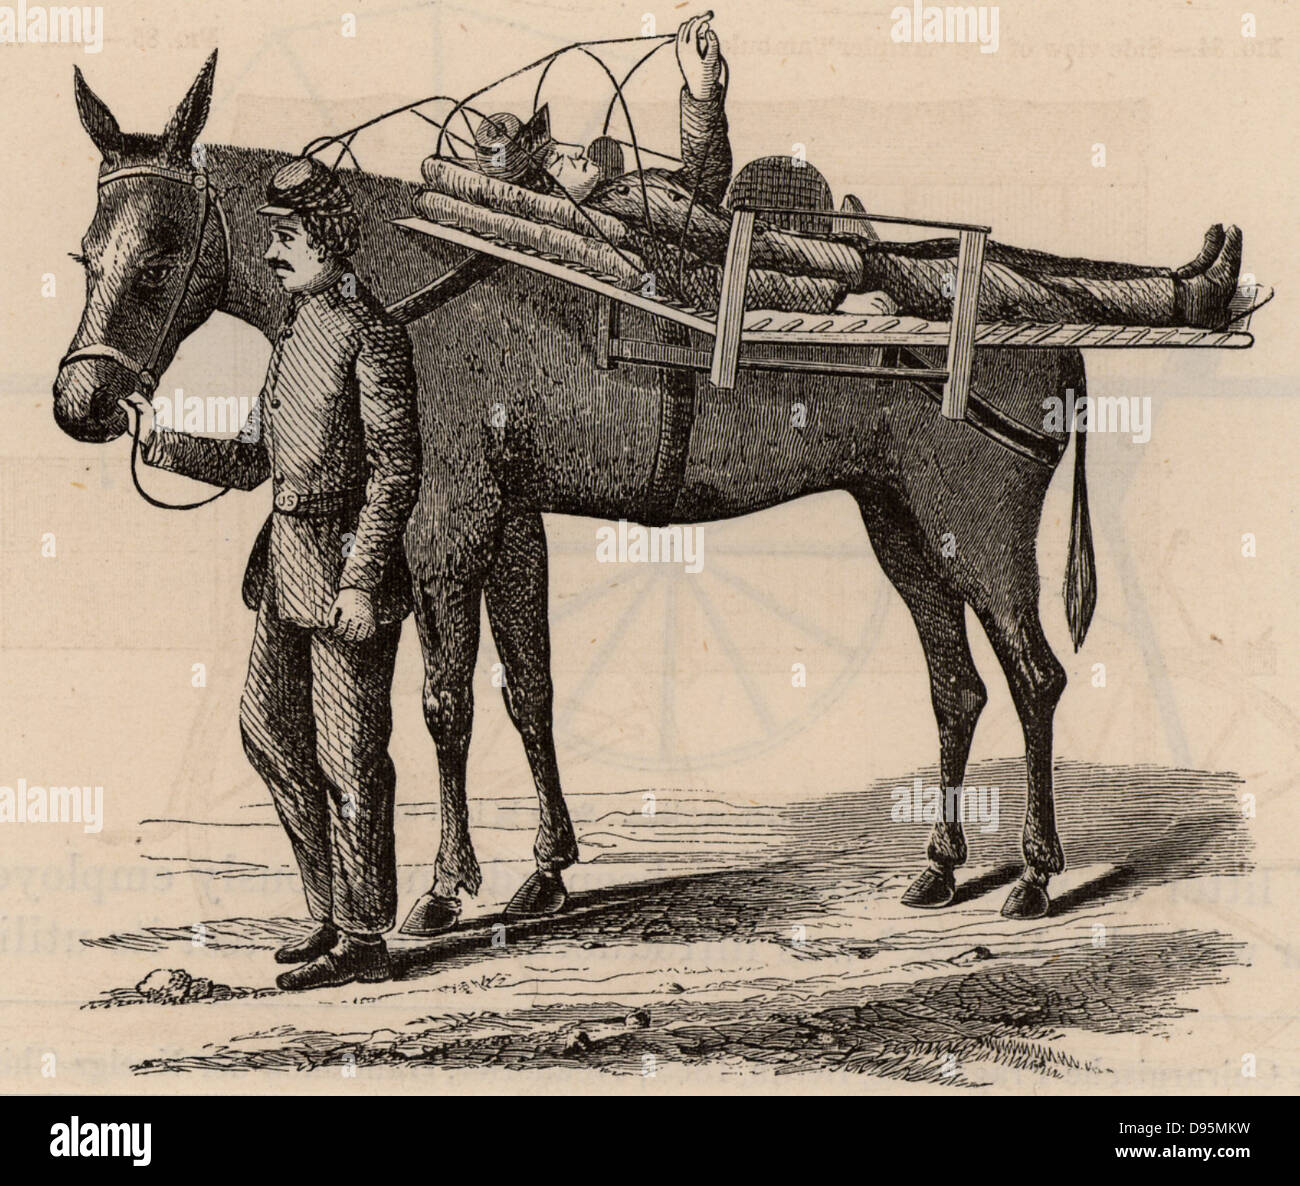 American Civil War 1861-1865. Casualty being transported by horse litter. Wood engraving 1865. Stock Photo